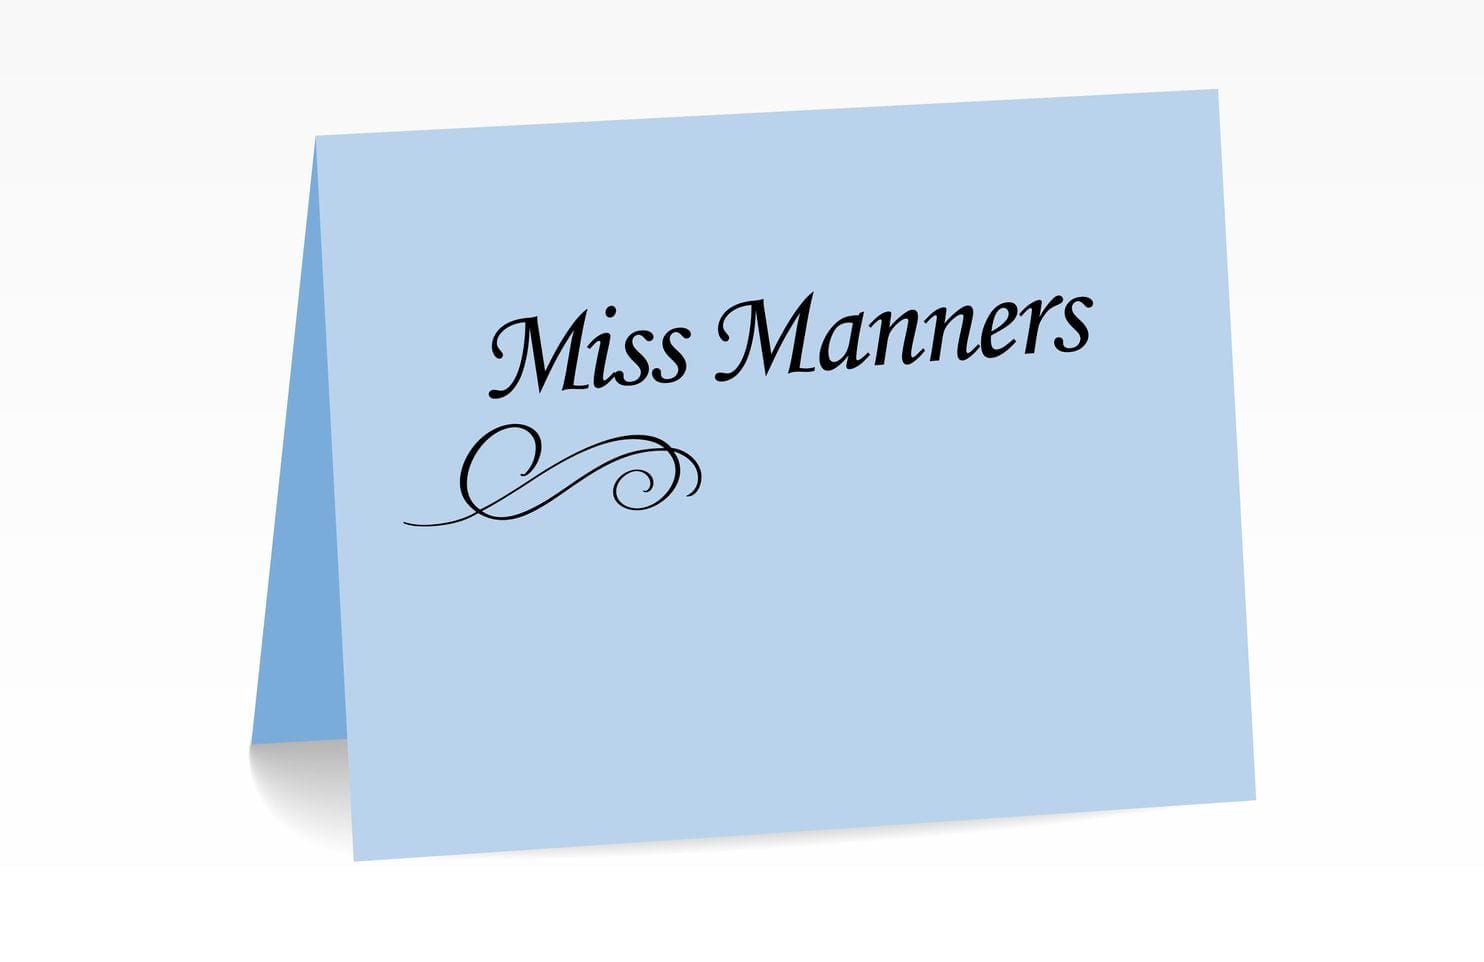 Miss Manners: Floral runaround could have been avoided